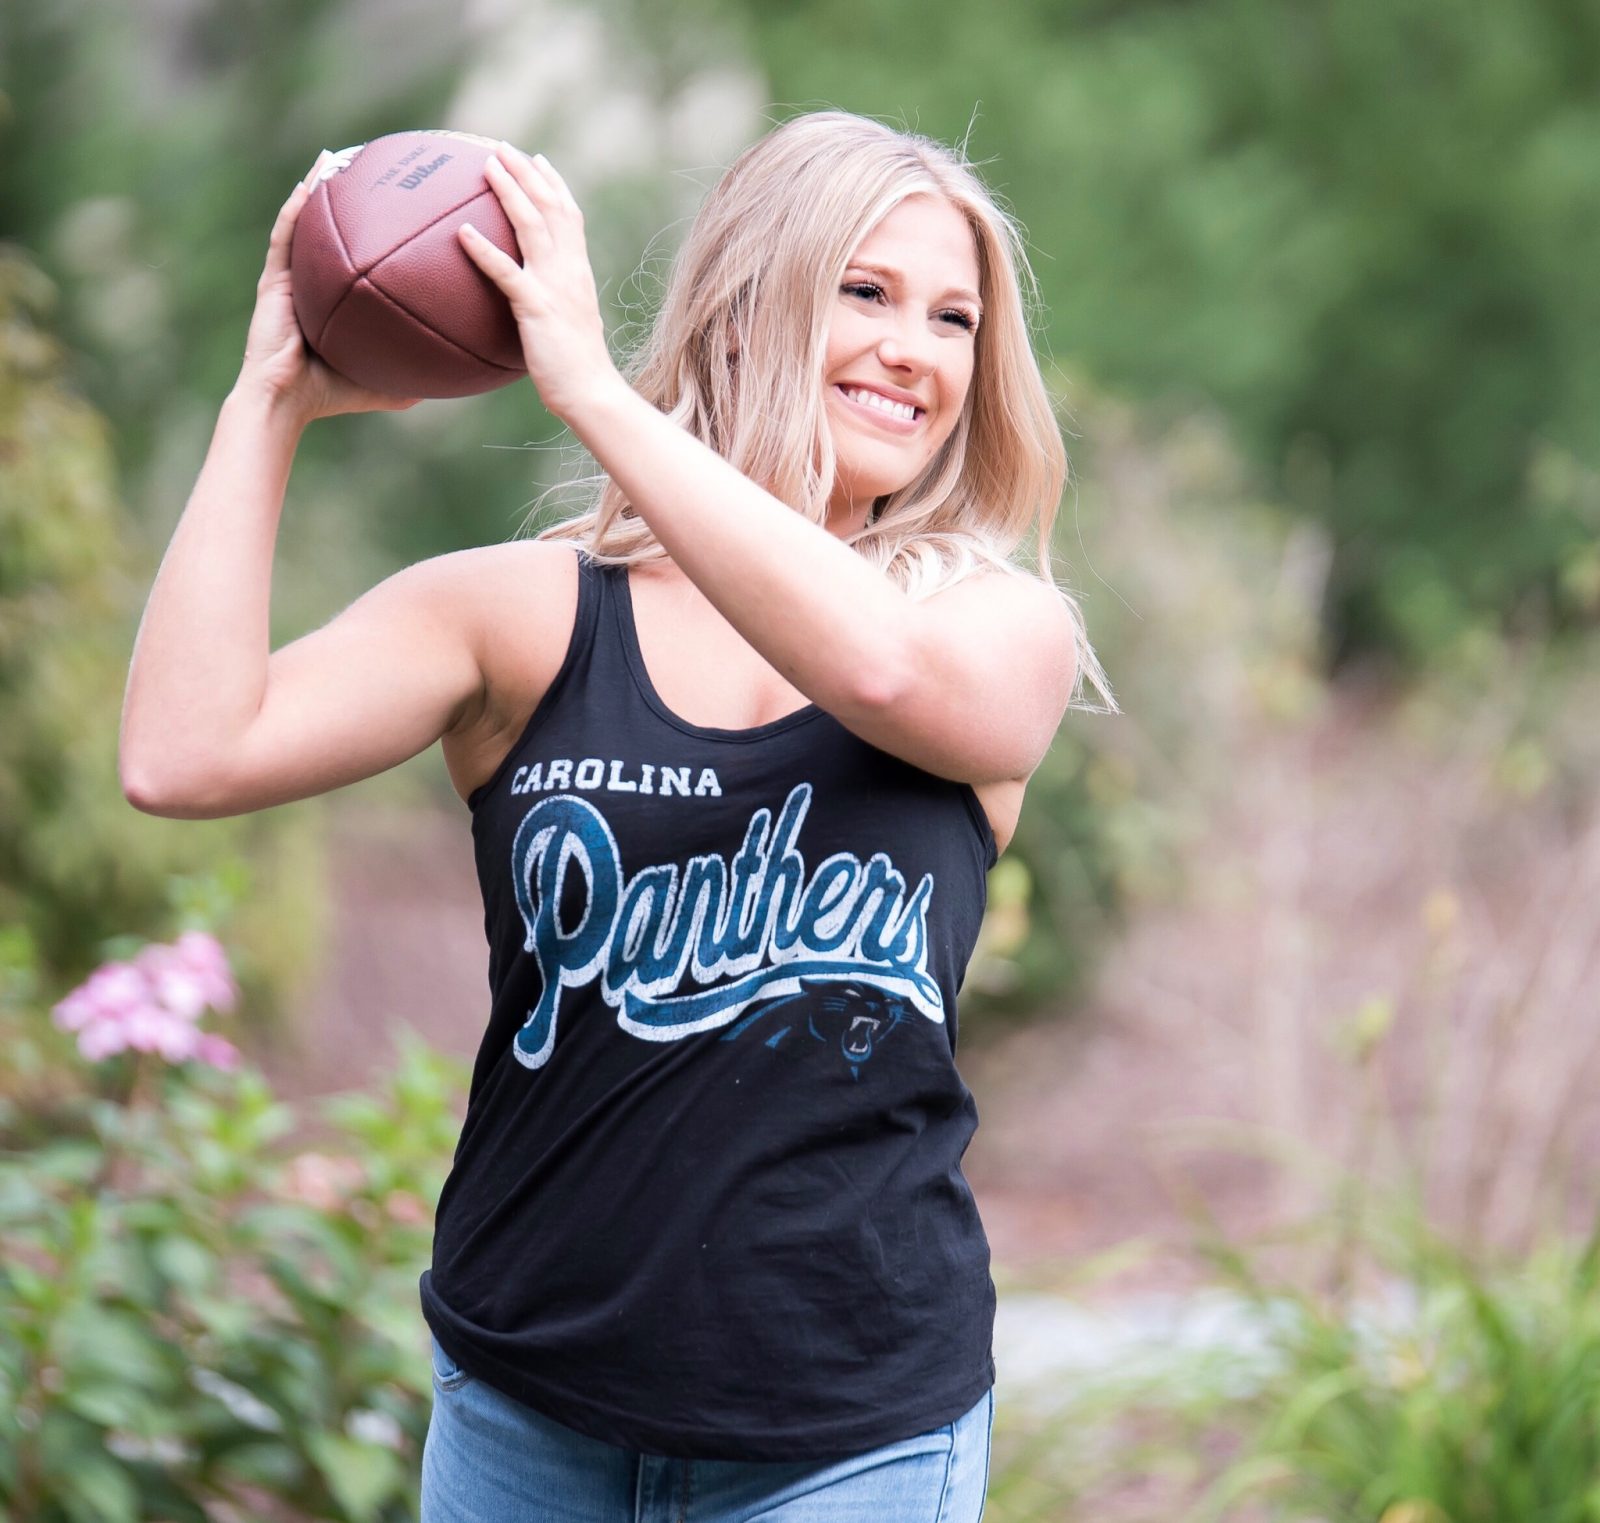 Carolina Panther Apparel NFL Fanstyle Football Fashion and Fun via Misty Nelson Influencer and Lifestyle Blogger frostedblog @frostedevents Patriots fashion and Carolina Panthers Fashion 